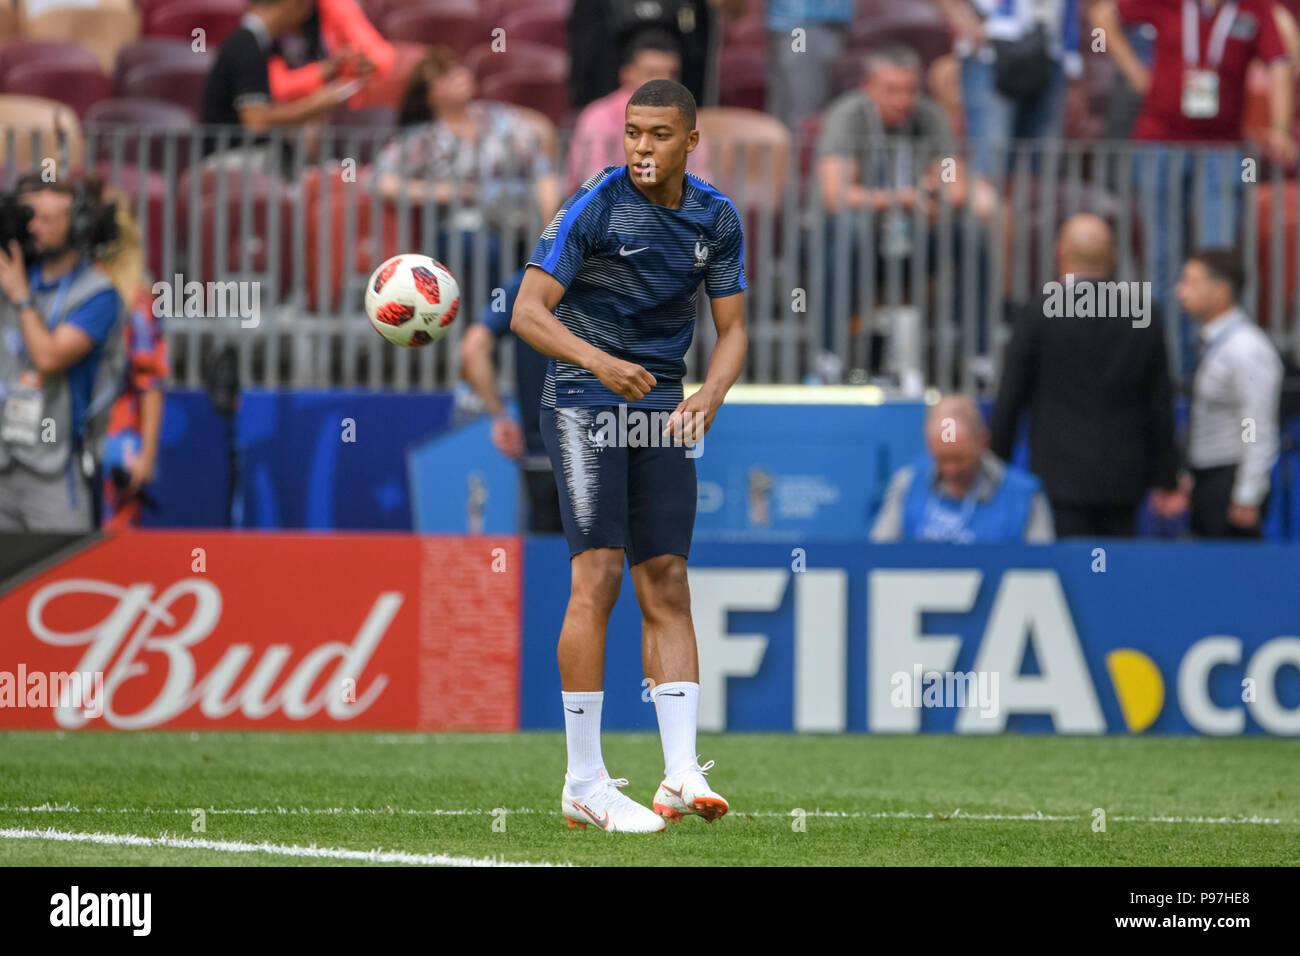 Moscow, Russia. 15th July 2018. Kylian Mbappe of France warming up at Luzhniki Stadium during the final between Franceand Croatia during the 2018 World Cup. Ulrik Pedersen/CSM Credit: Cal Sport Media/Alamy Live News Stock Photo